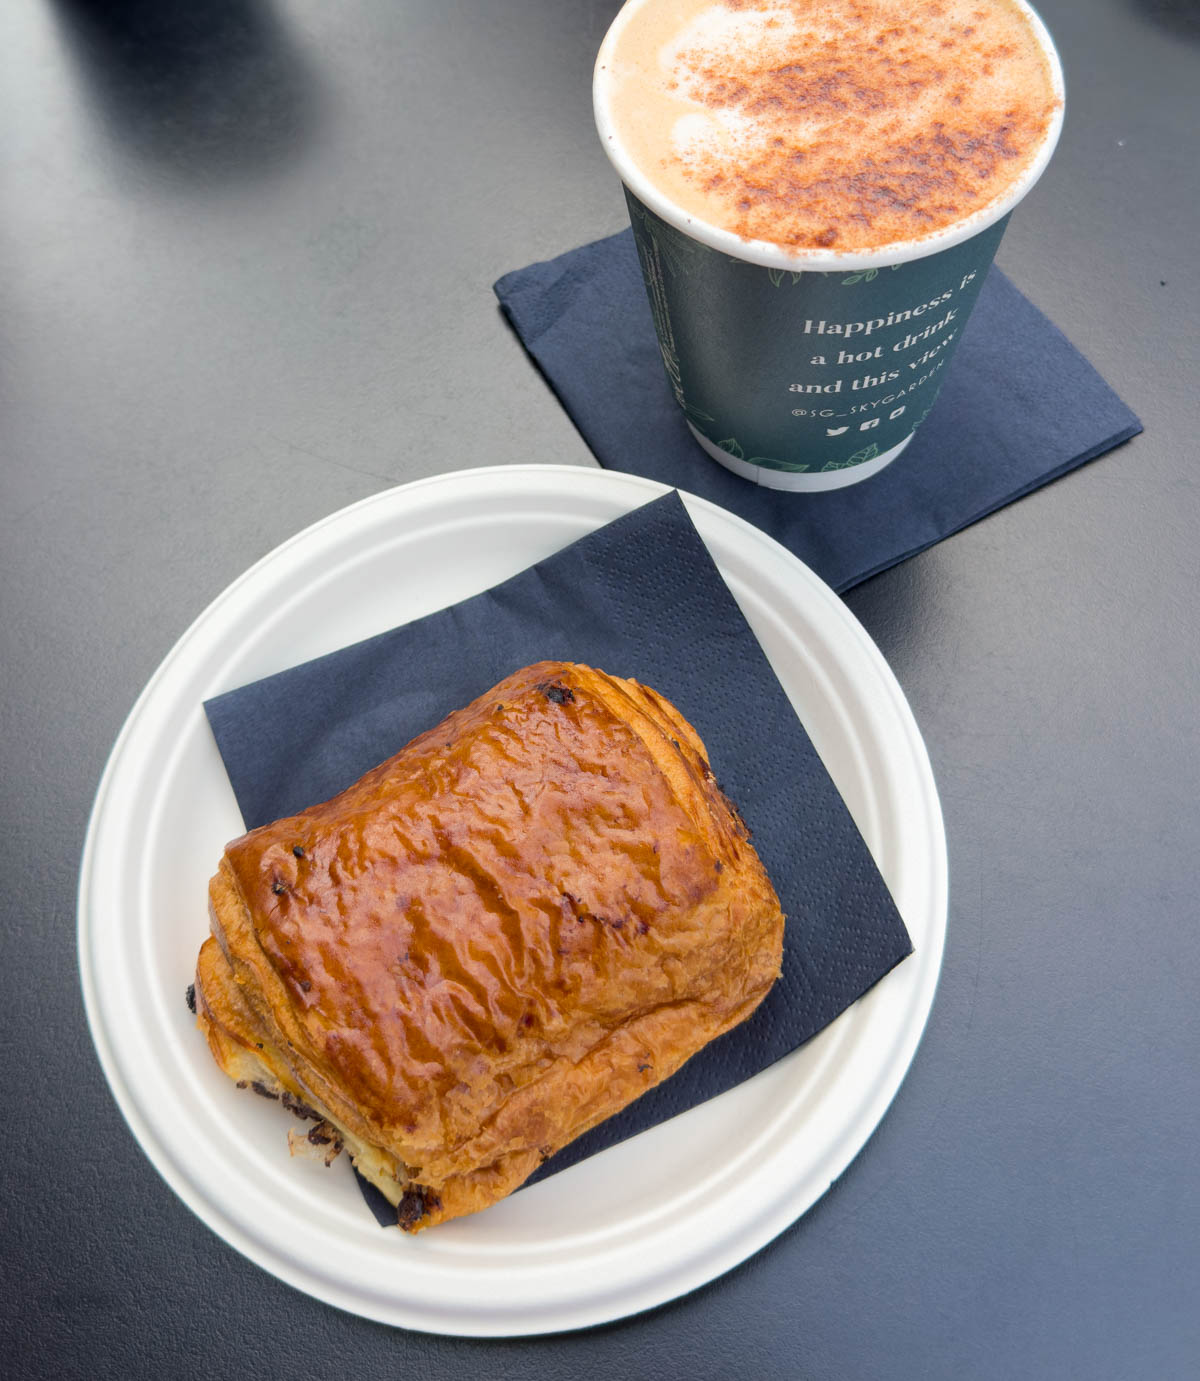 A pastry on a plate next to a cup of coffee.